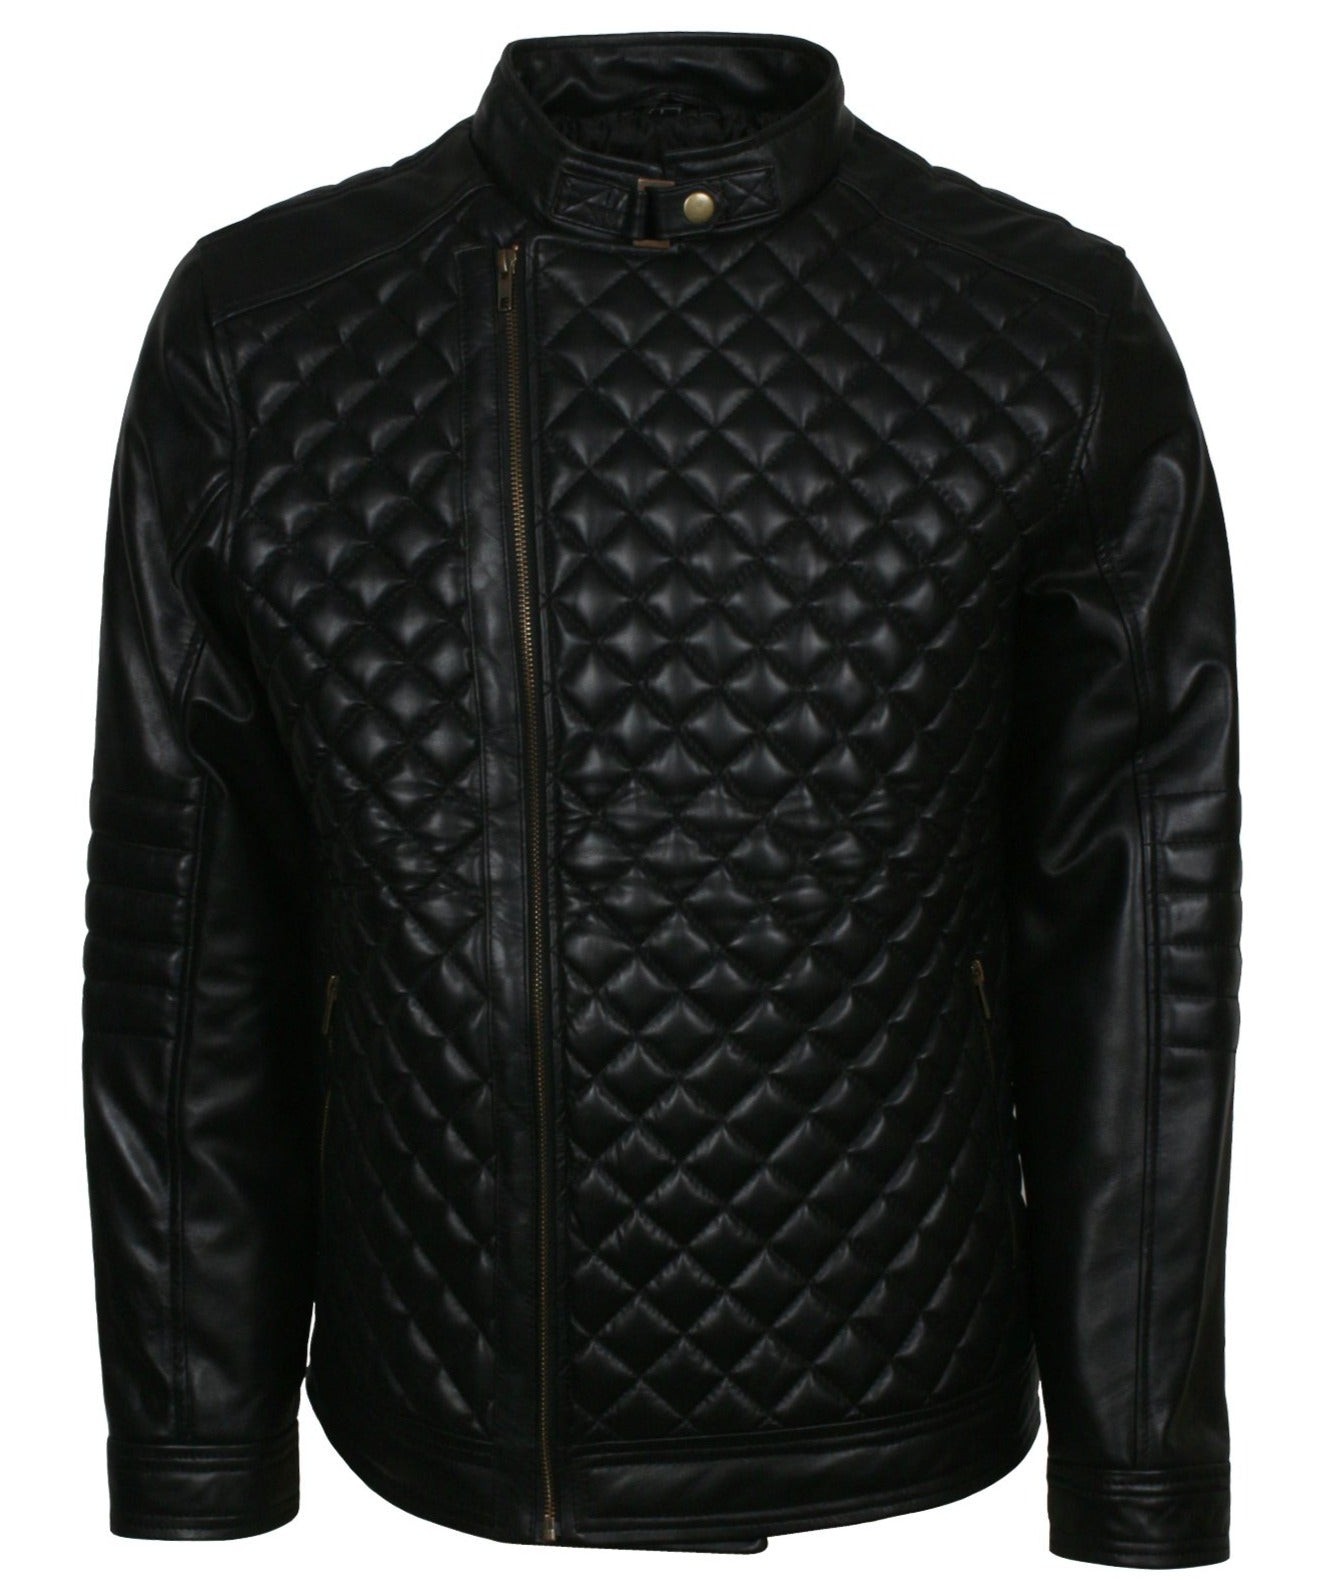 Men Beckett Black Quilted Leather Jacket, Small - Men's Leather Jackets - 100% Real Leather - NYC Leather Jackets